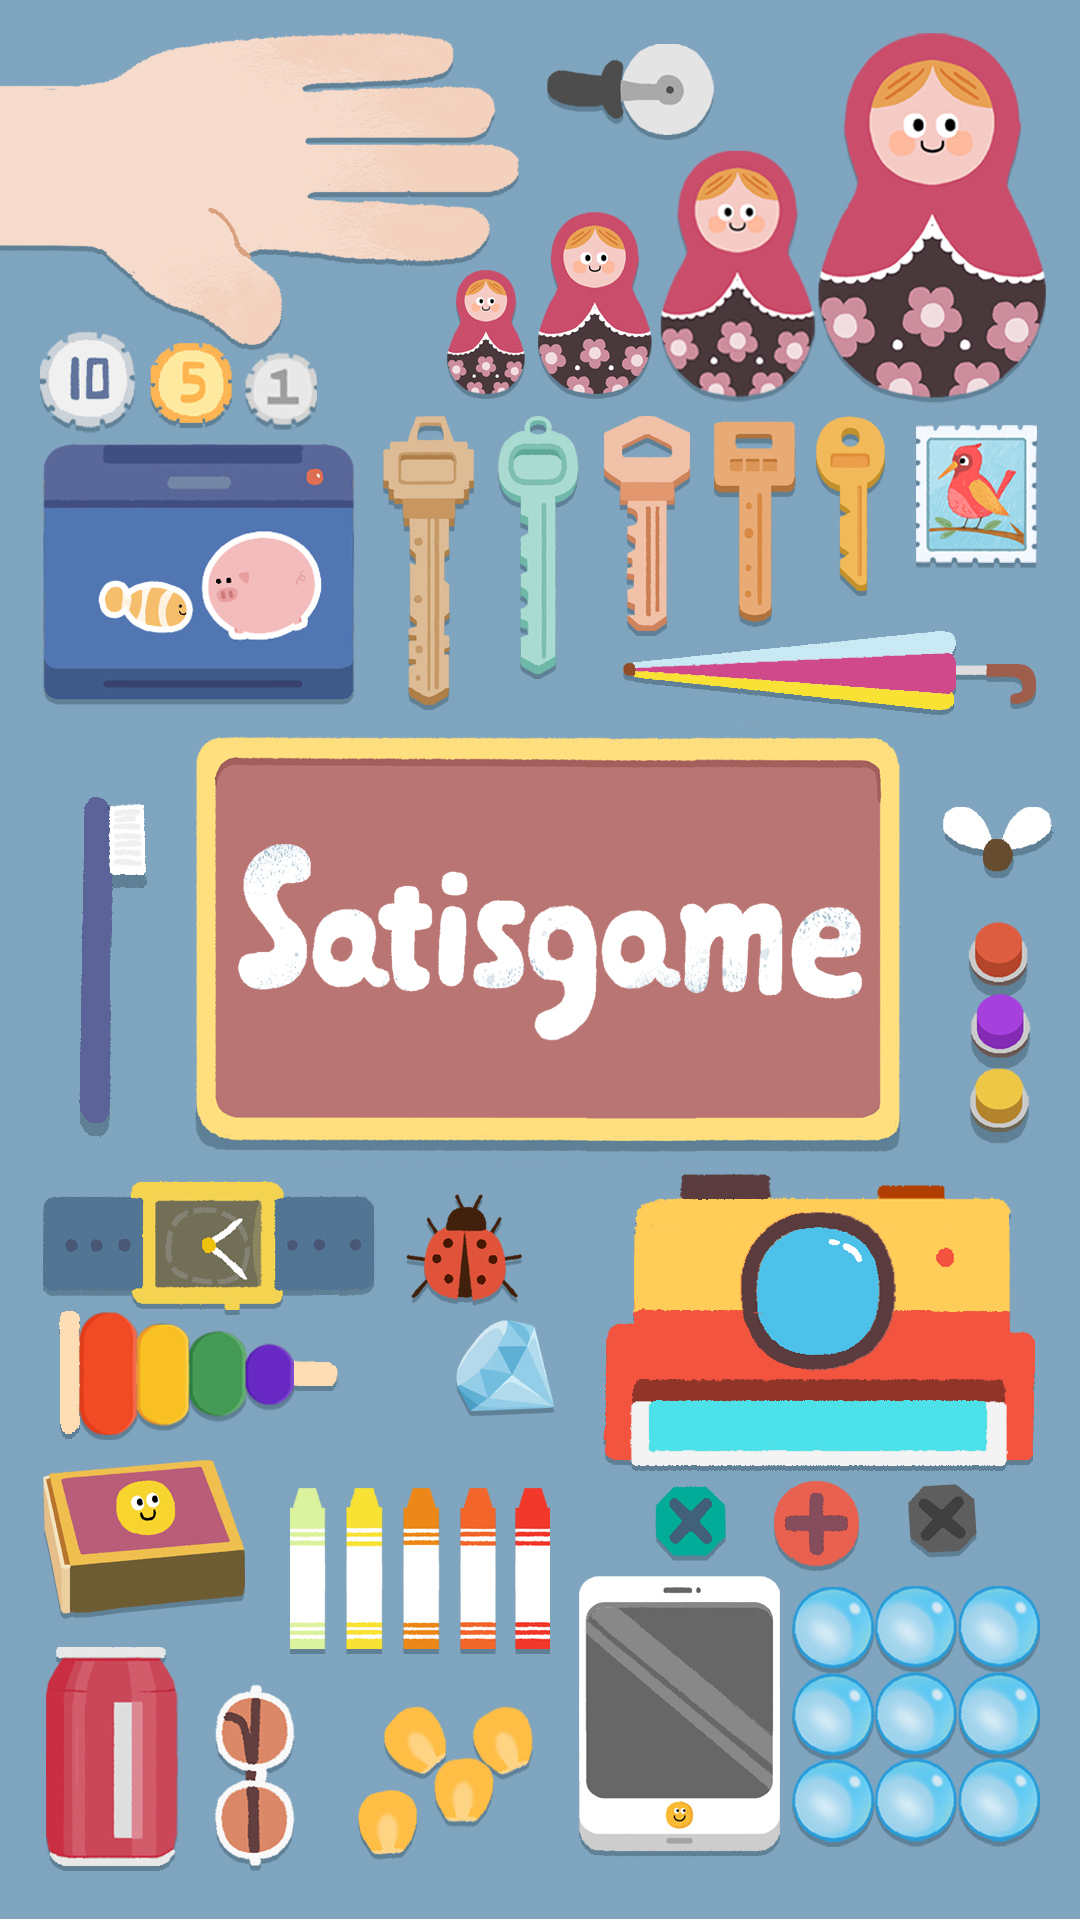 Full version of Android Logic game apk Satisgame for tablet and phone.